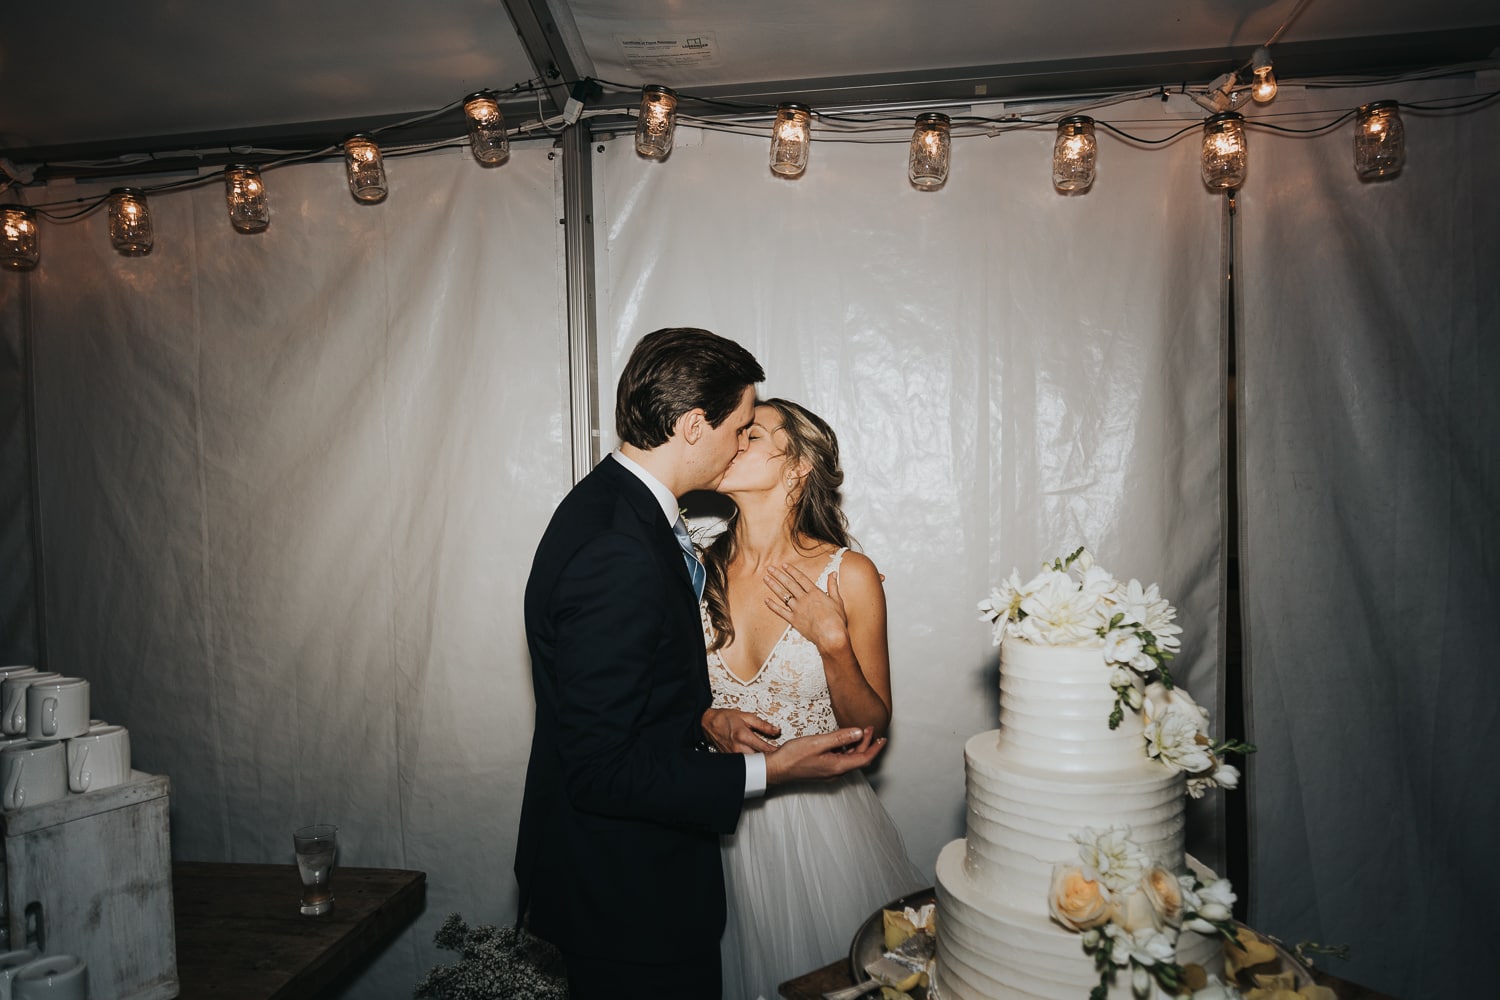 Wedding Photographer, Bride and Groom kiss at their reception